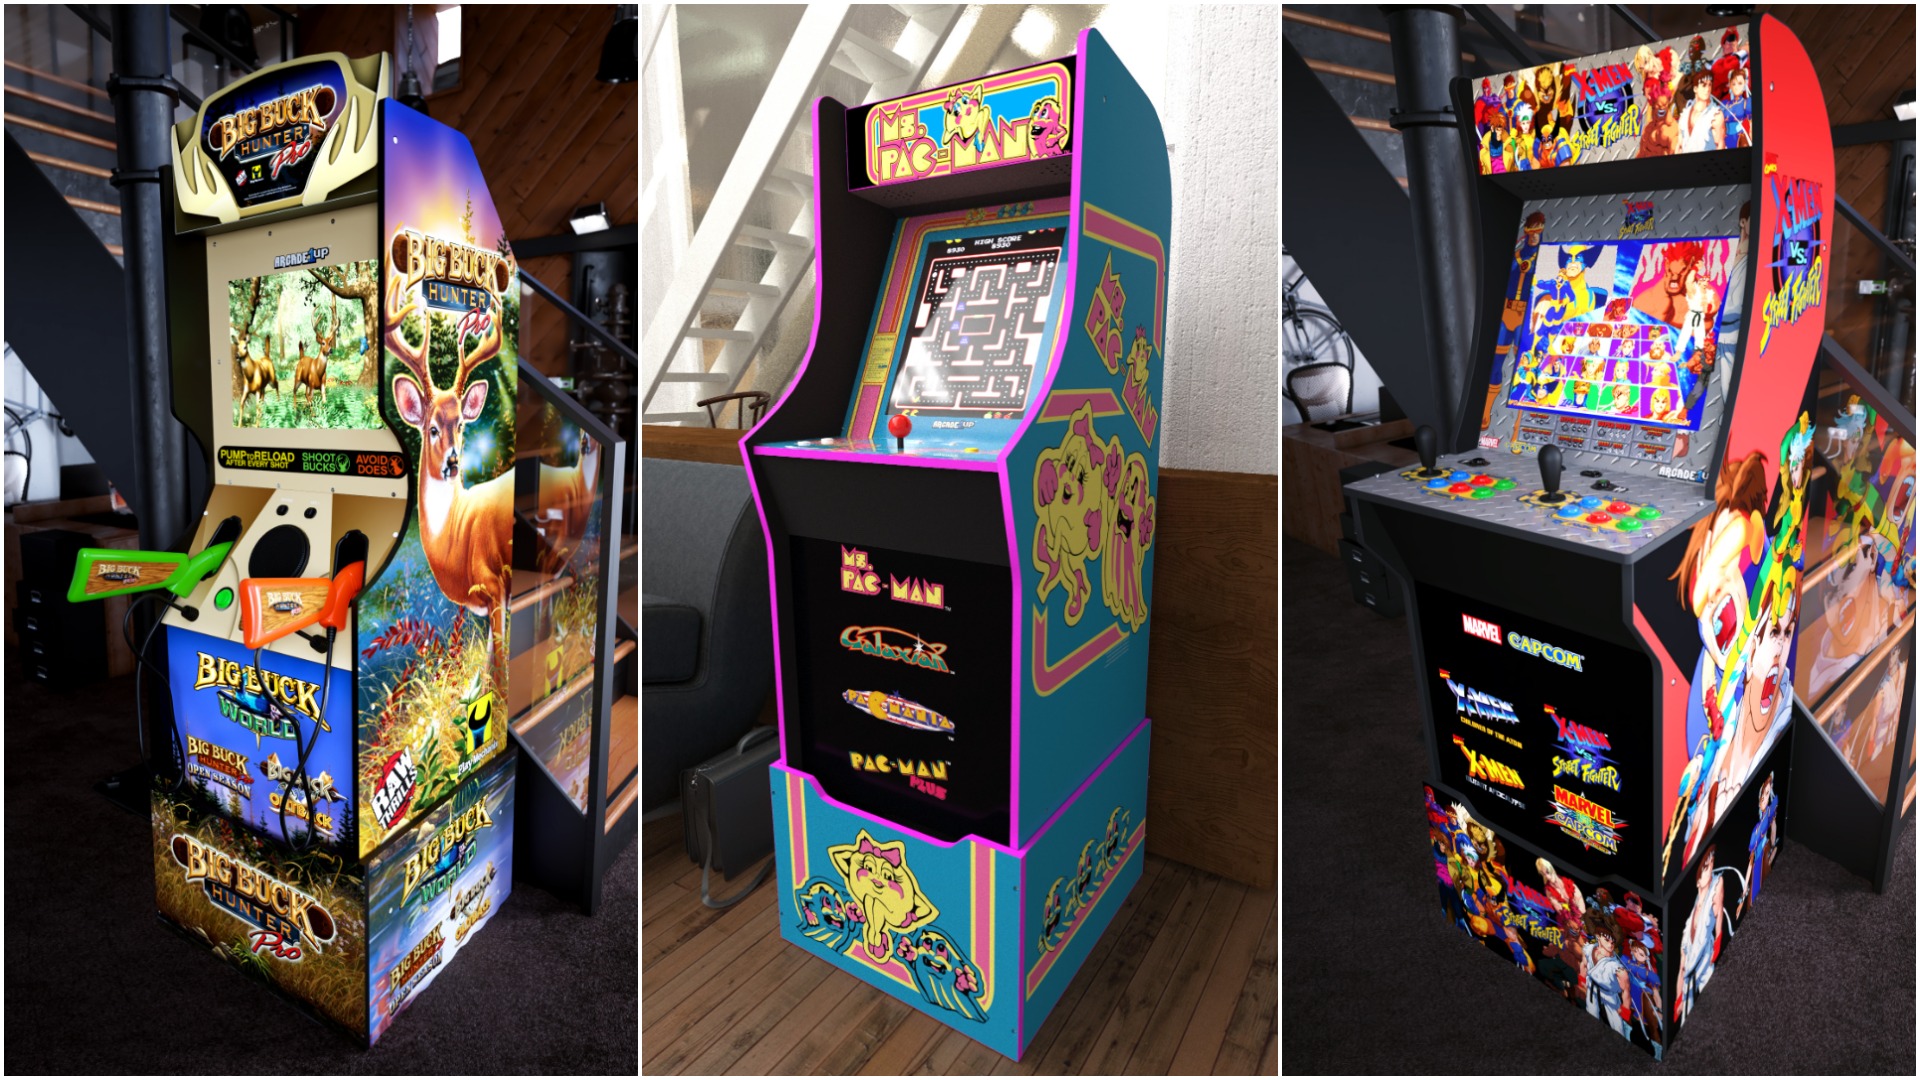 How Arcade1Up Plans to Revive Arcade Culture | Den of Geek